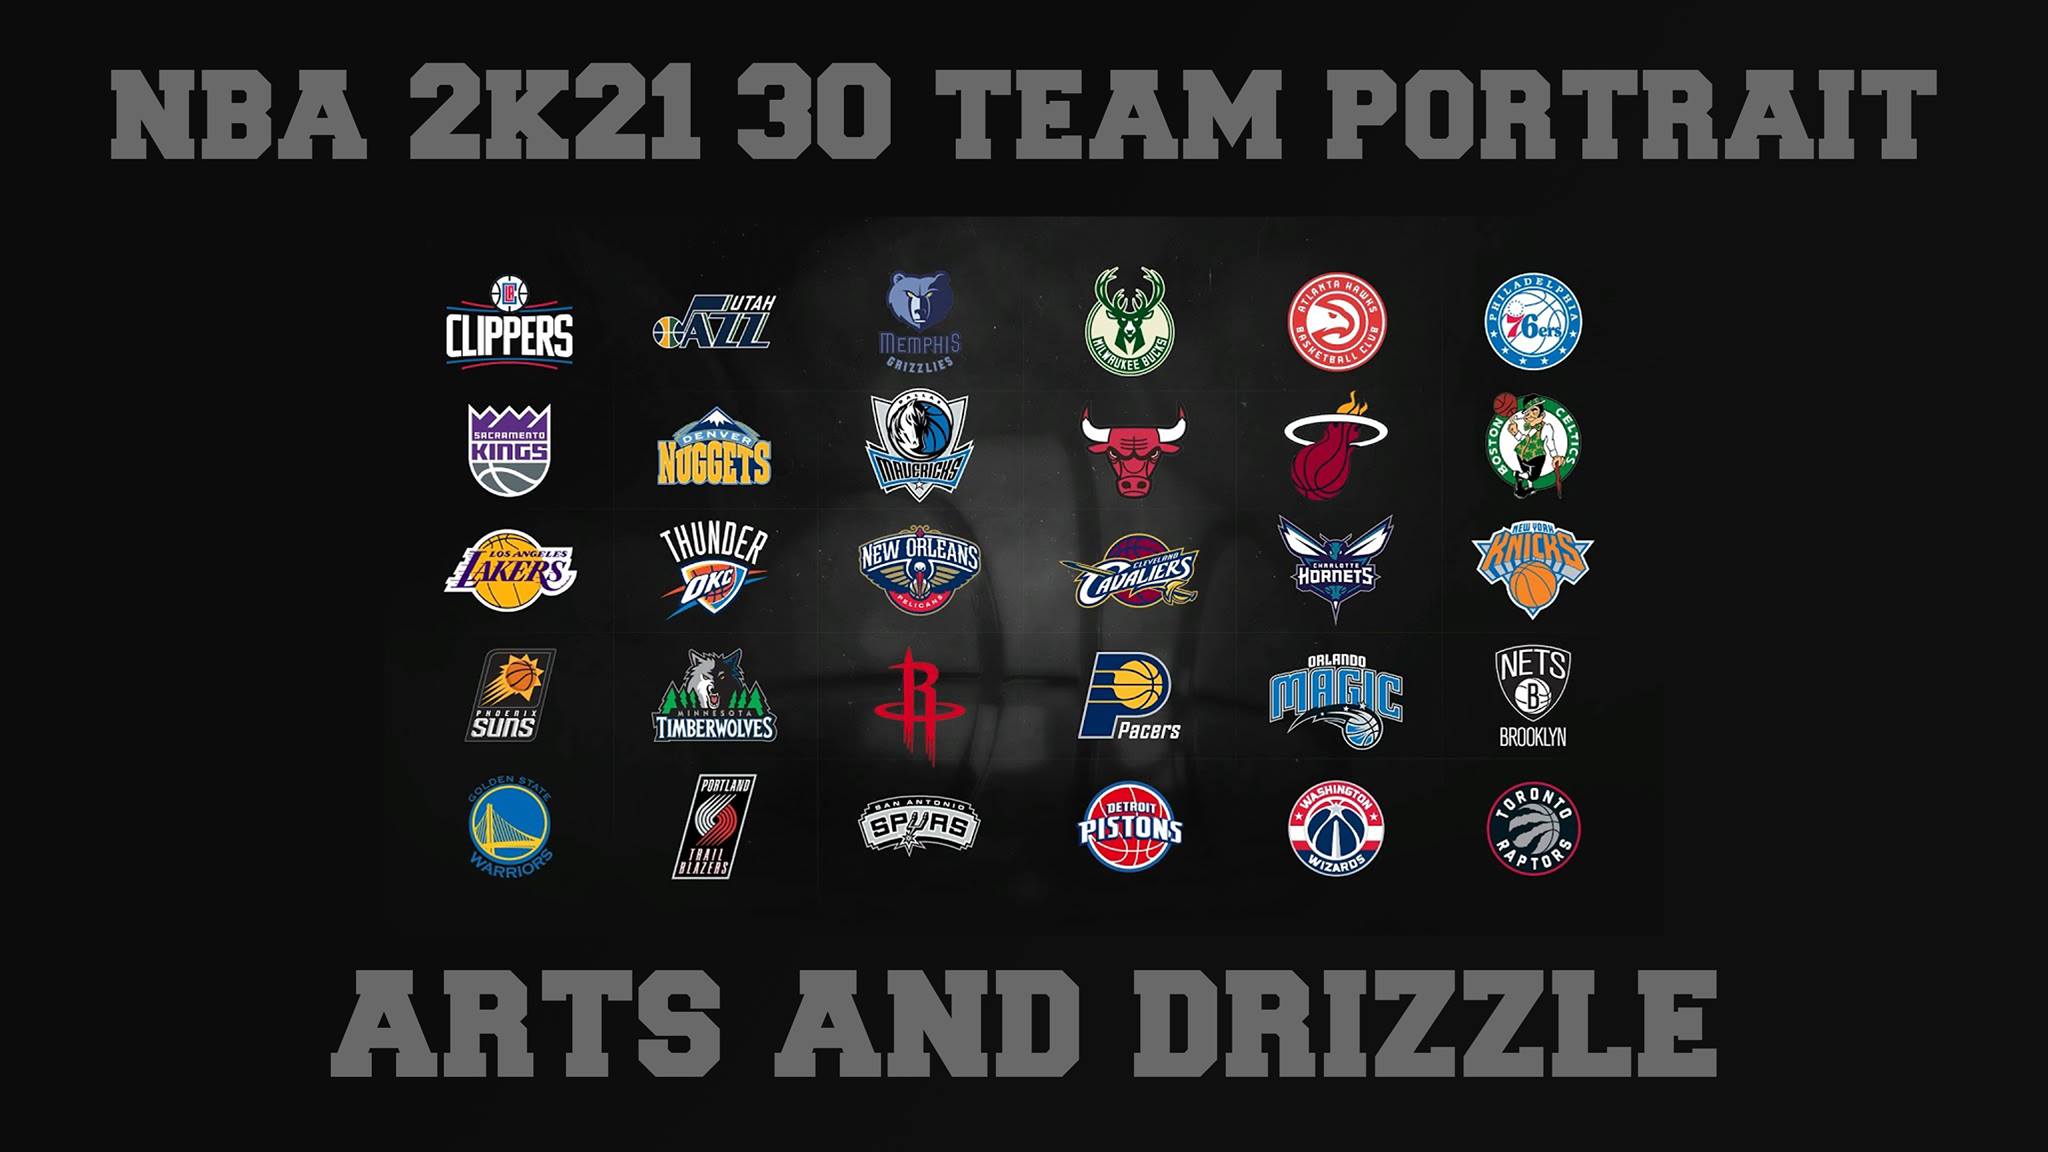 NBA 2K21 30 TEAMS PORTRAIT PACK BY ARTS AND DRIZZLE